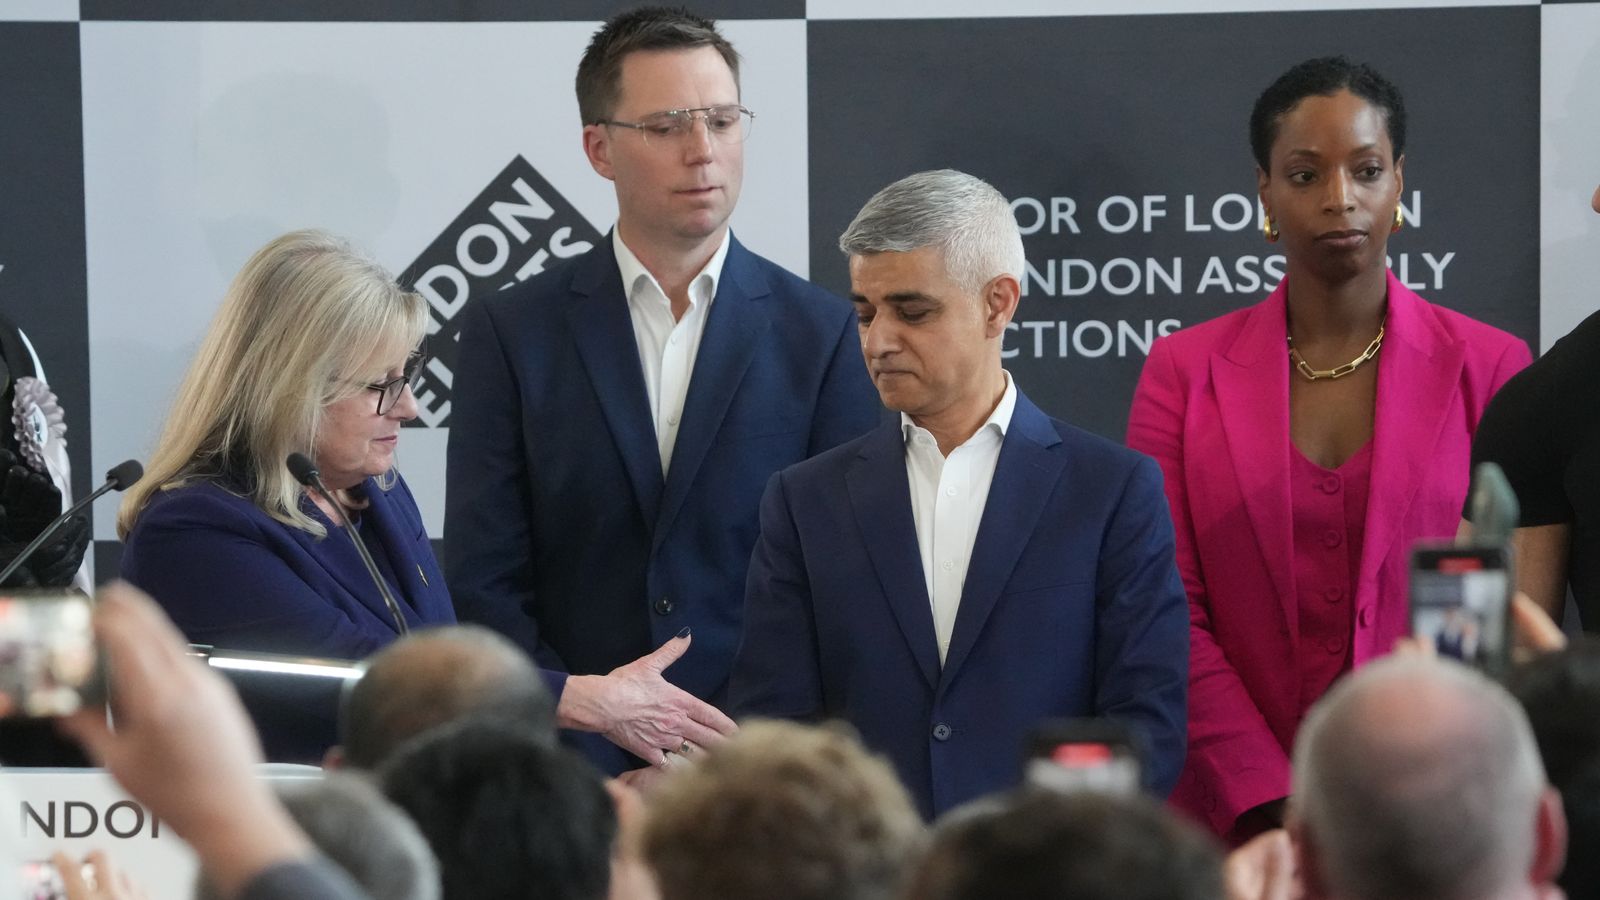 Sadiq Khan secures convincing win over Tory rival in London mayoral race